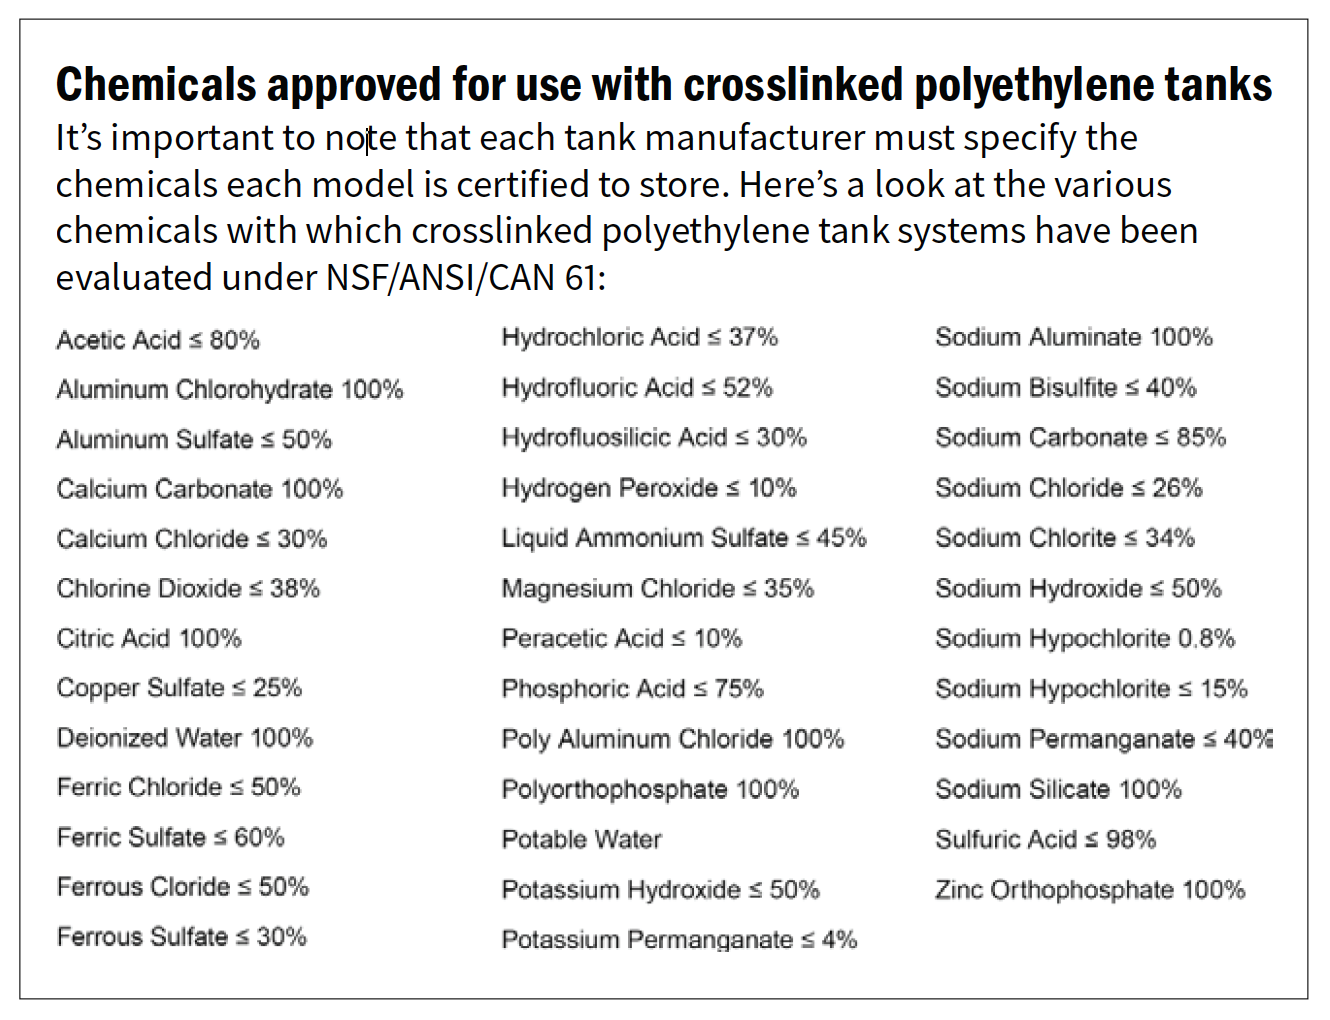 Chemicals approved for use with crosslinked polyethylene tanks